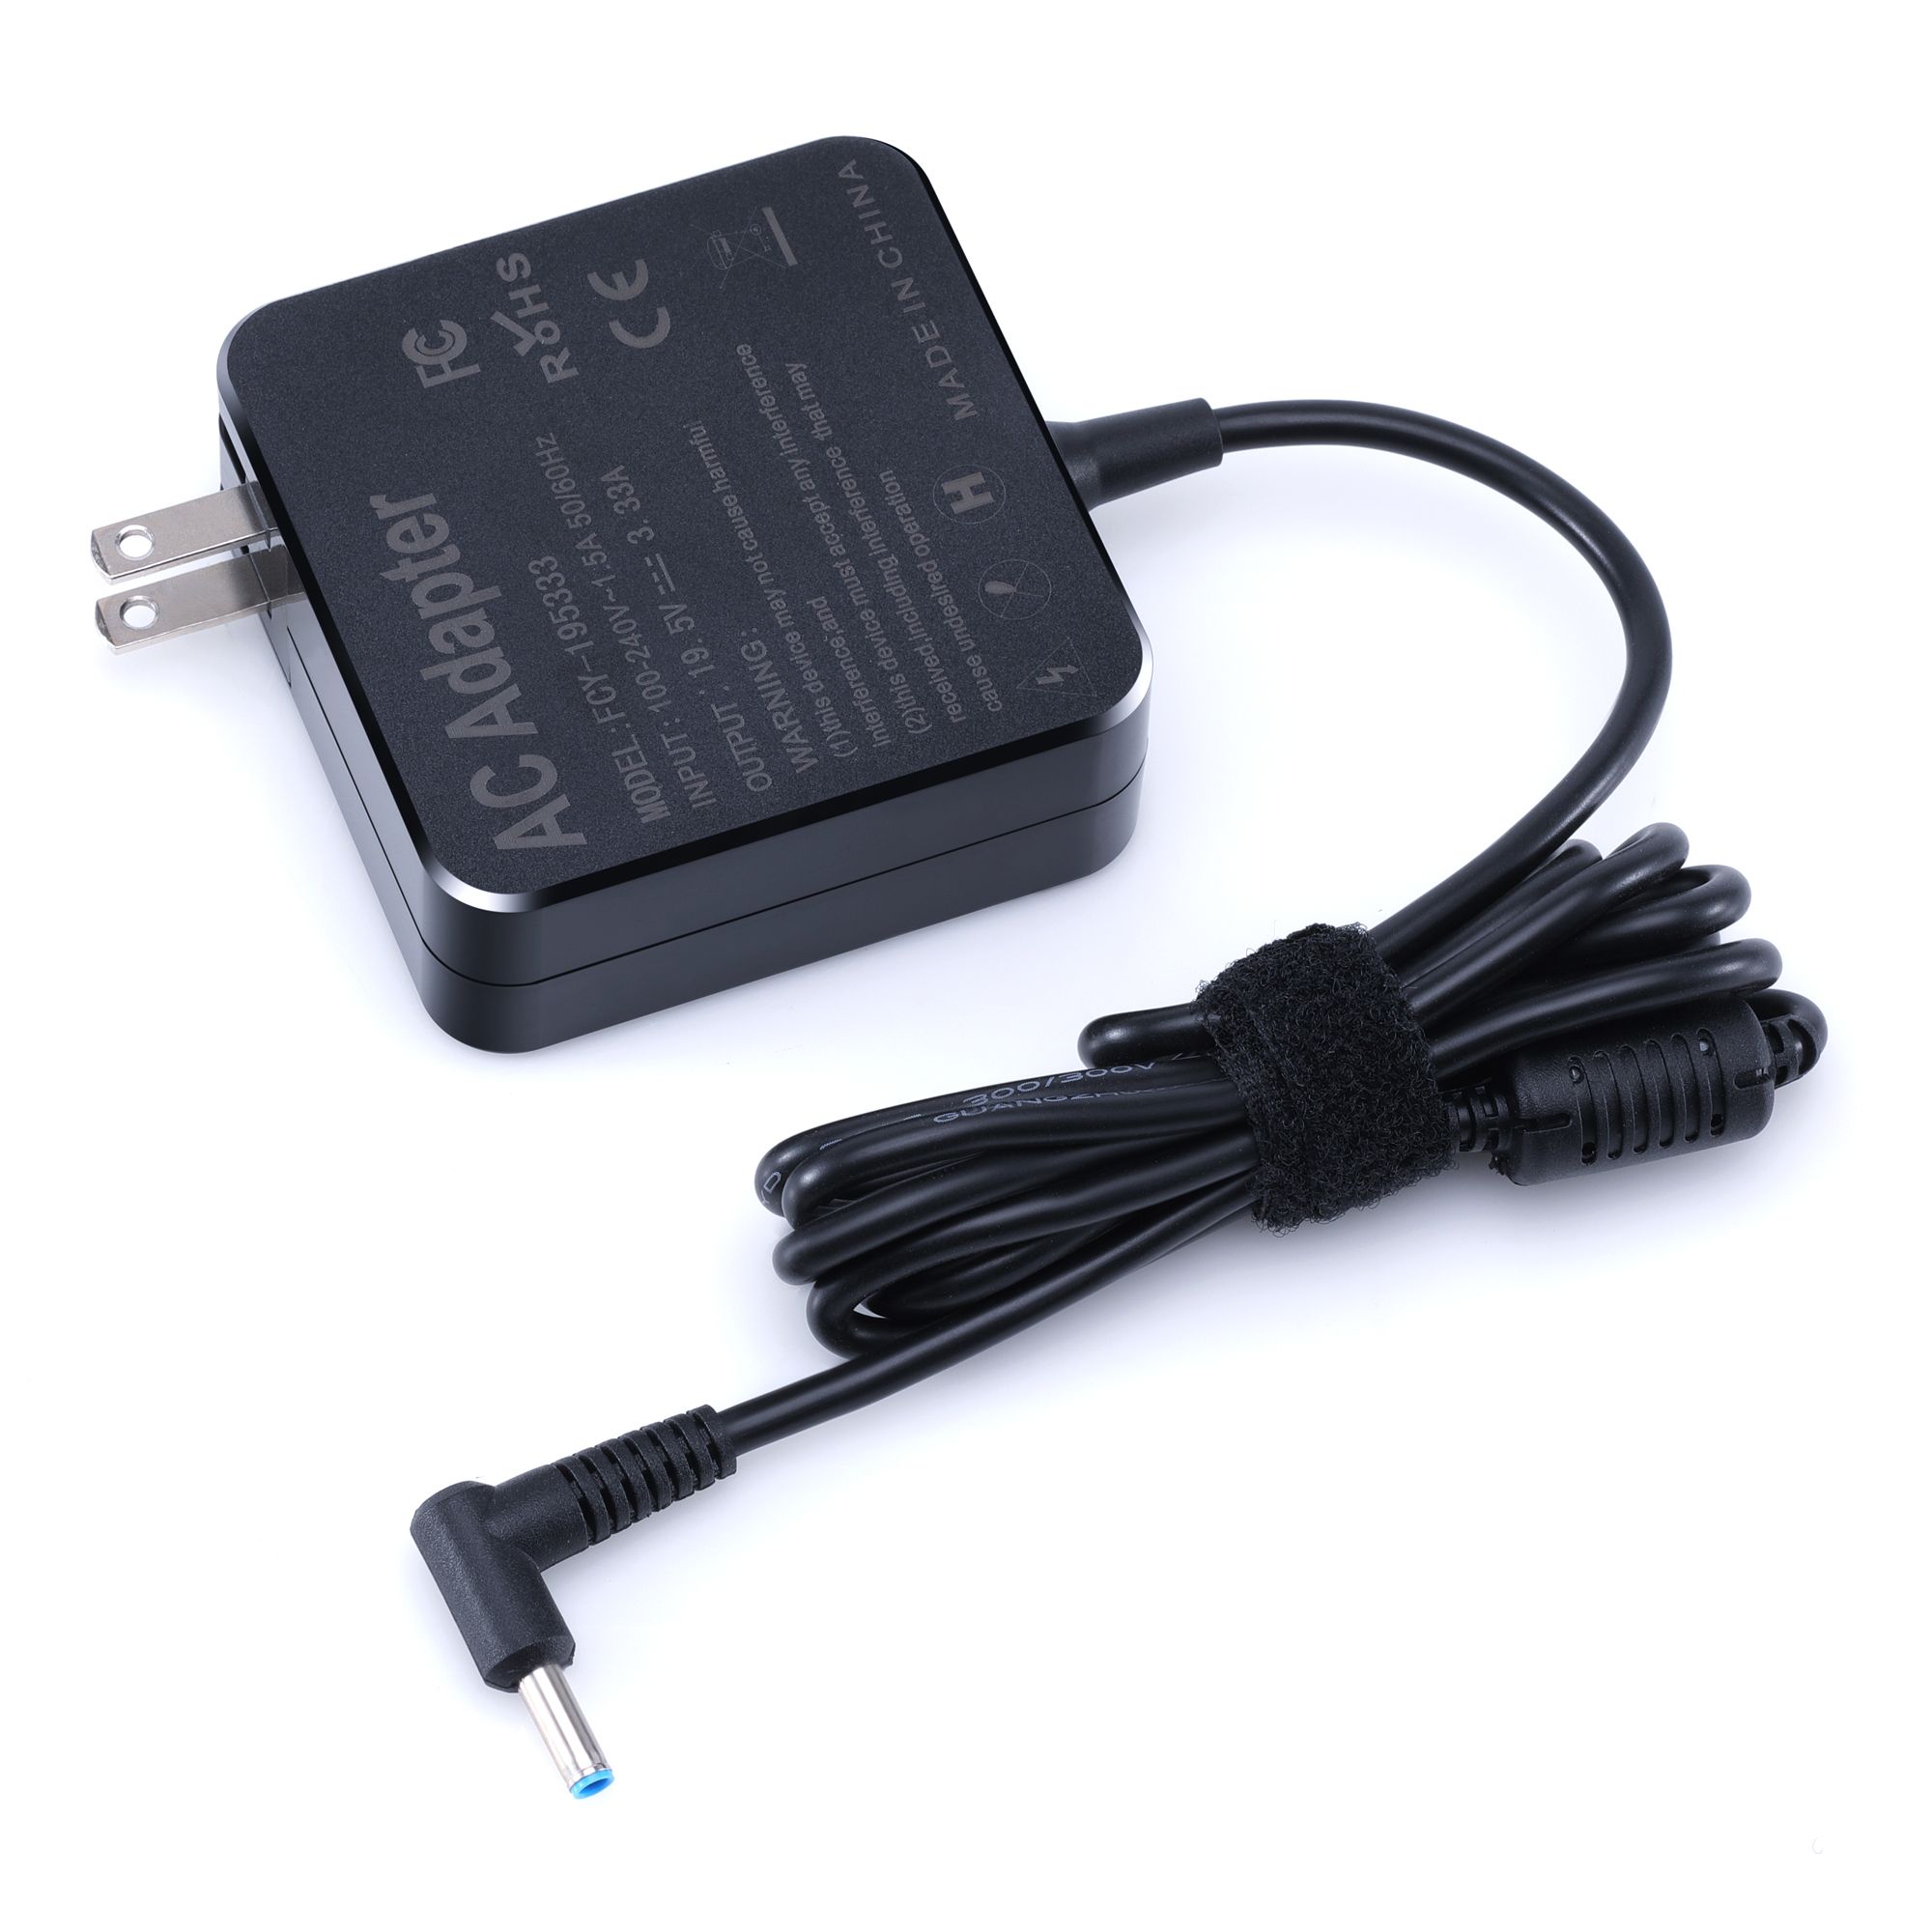 Fothwin-195V-333A-65W-Interface-45times30mm-Laptop-AC-Power-Adapter-Notebook-Charger-For-HP-1454514